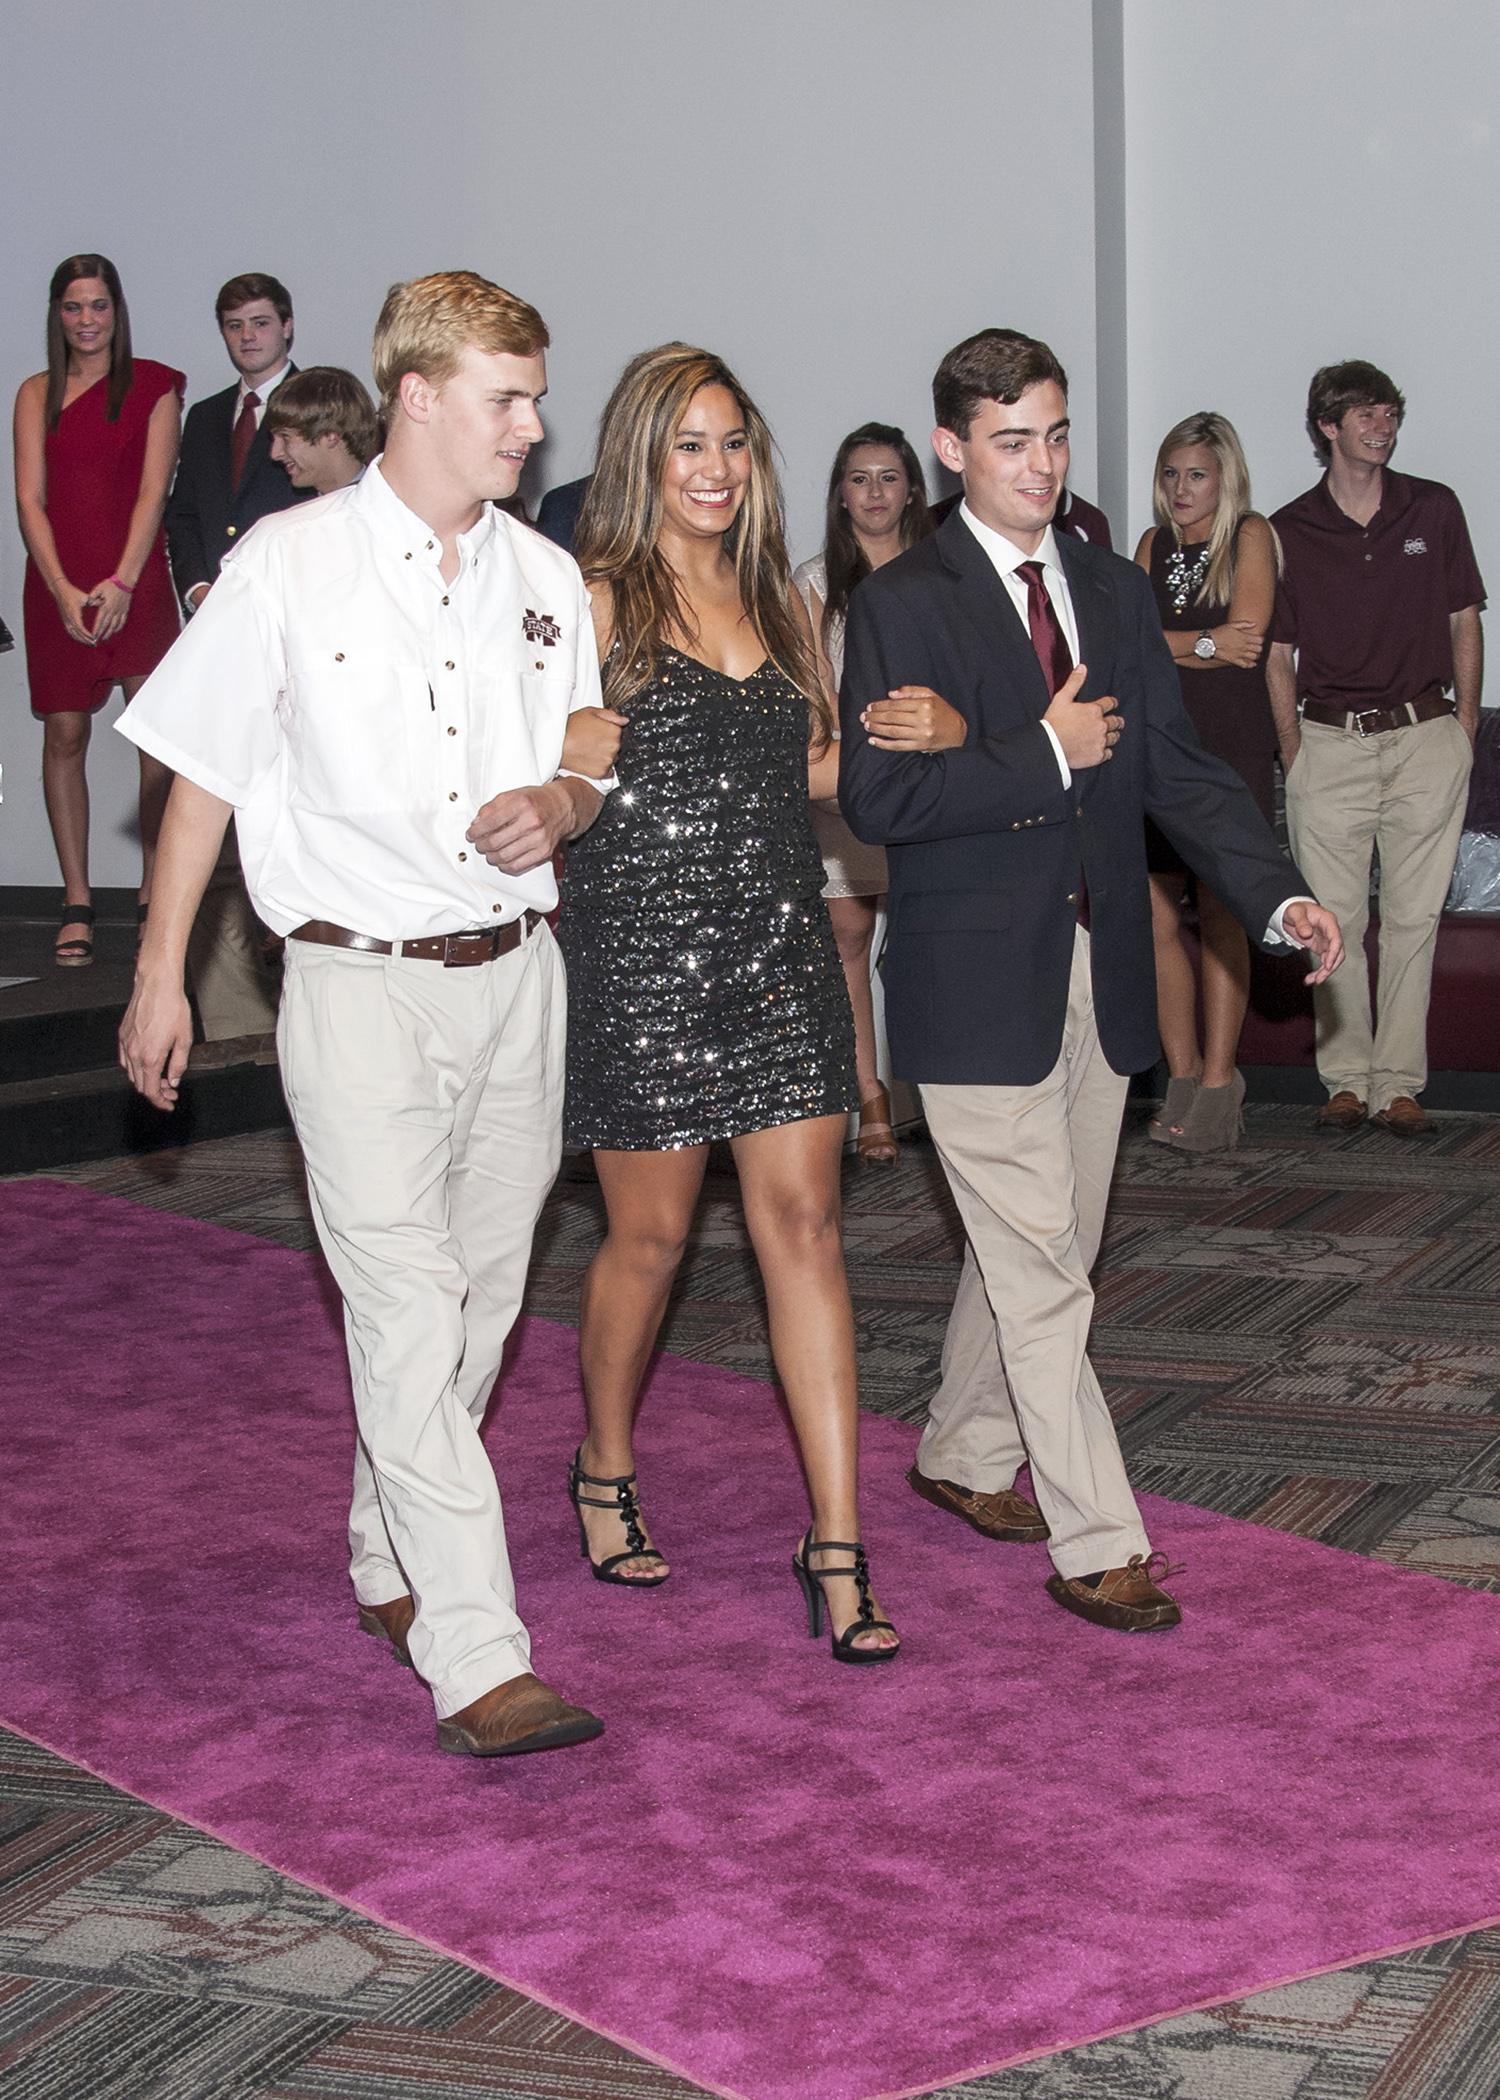 Mississippi State University junior Ashley Rowland of Gulfport, escorted by Justin Lofton of Bentonville, Ark., left, and John Dergin May of Madison, models a Milly gown at the Rent the Runway fashion show on Oct. 16, 2013. The event was sponsored by Fashion Focus, the campus service club for students interested in apparel, textiles and merchandising careers. (Photo by MSU Ag Communications/Scott Corey)